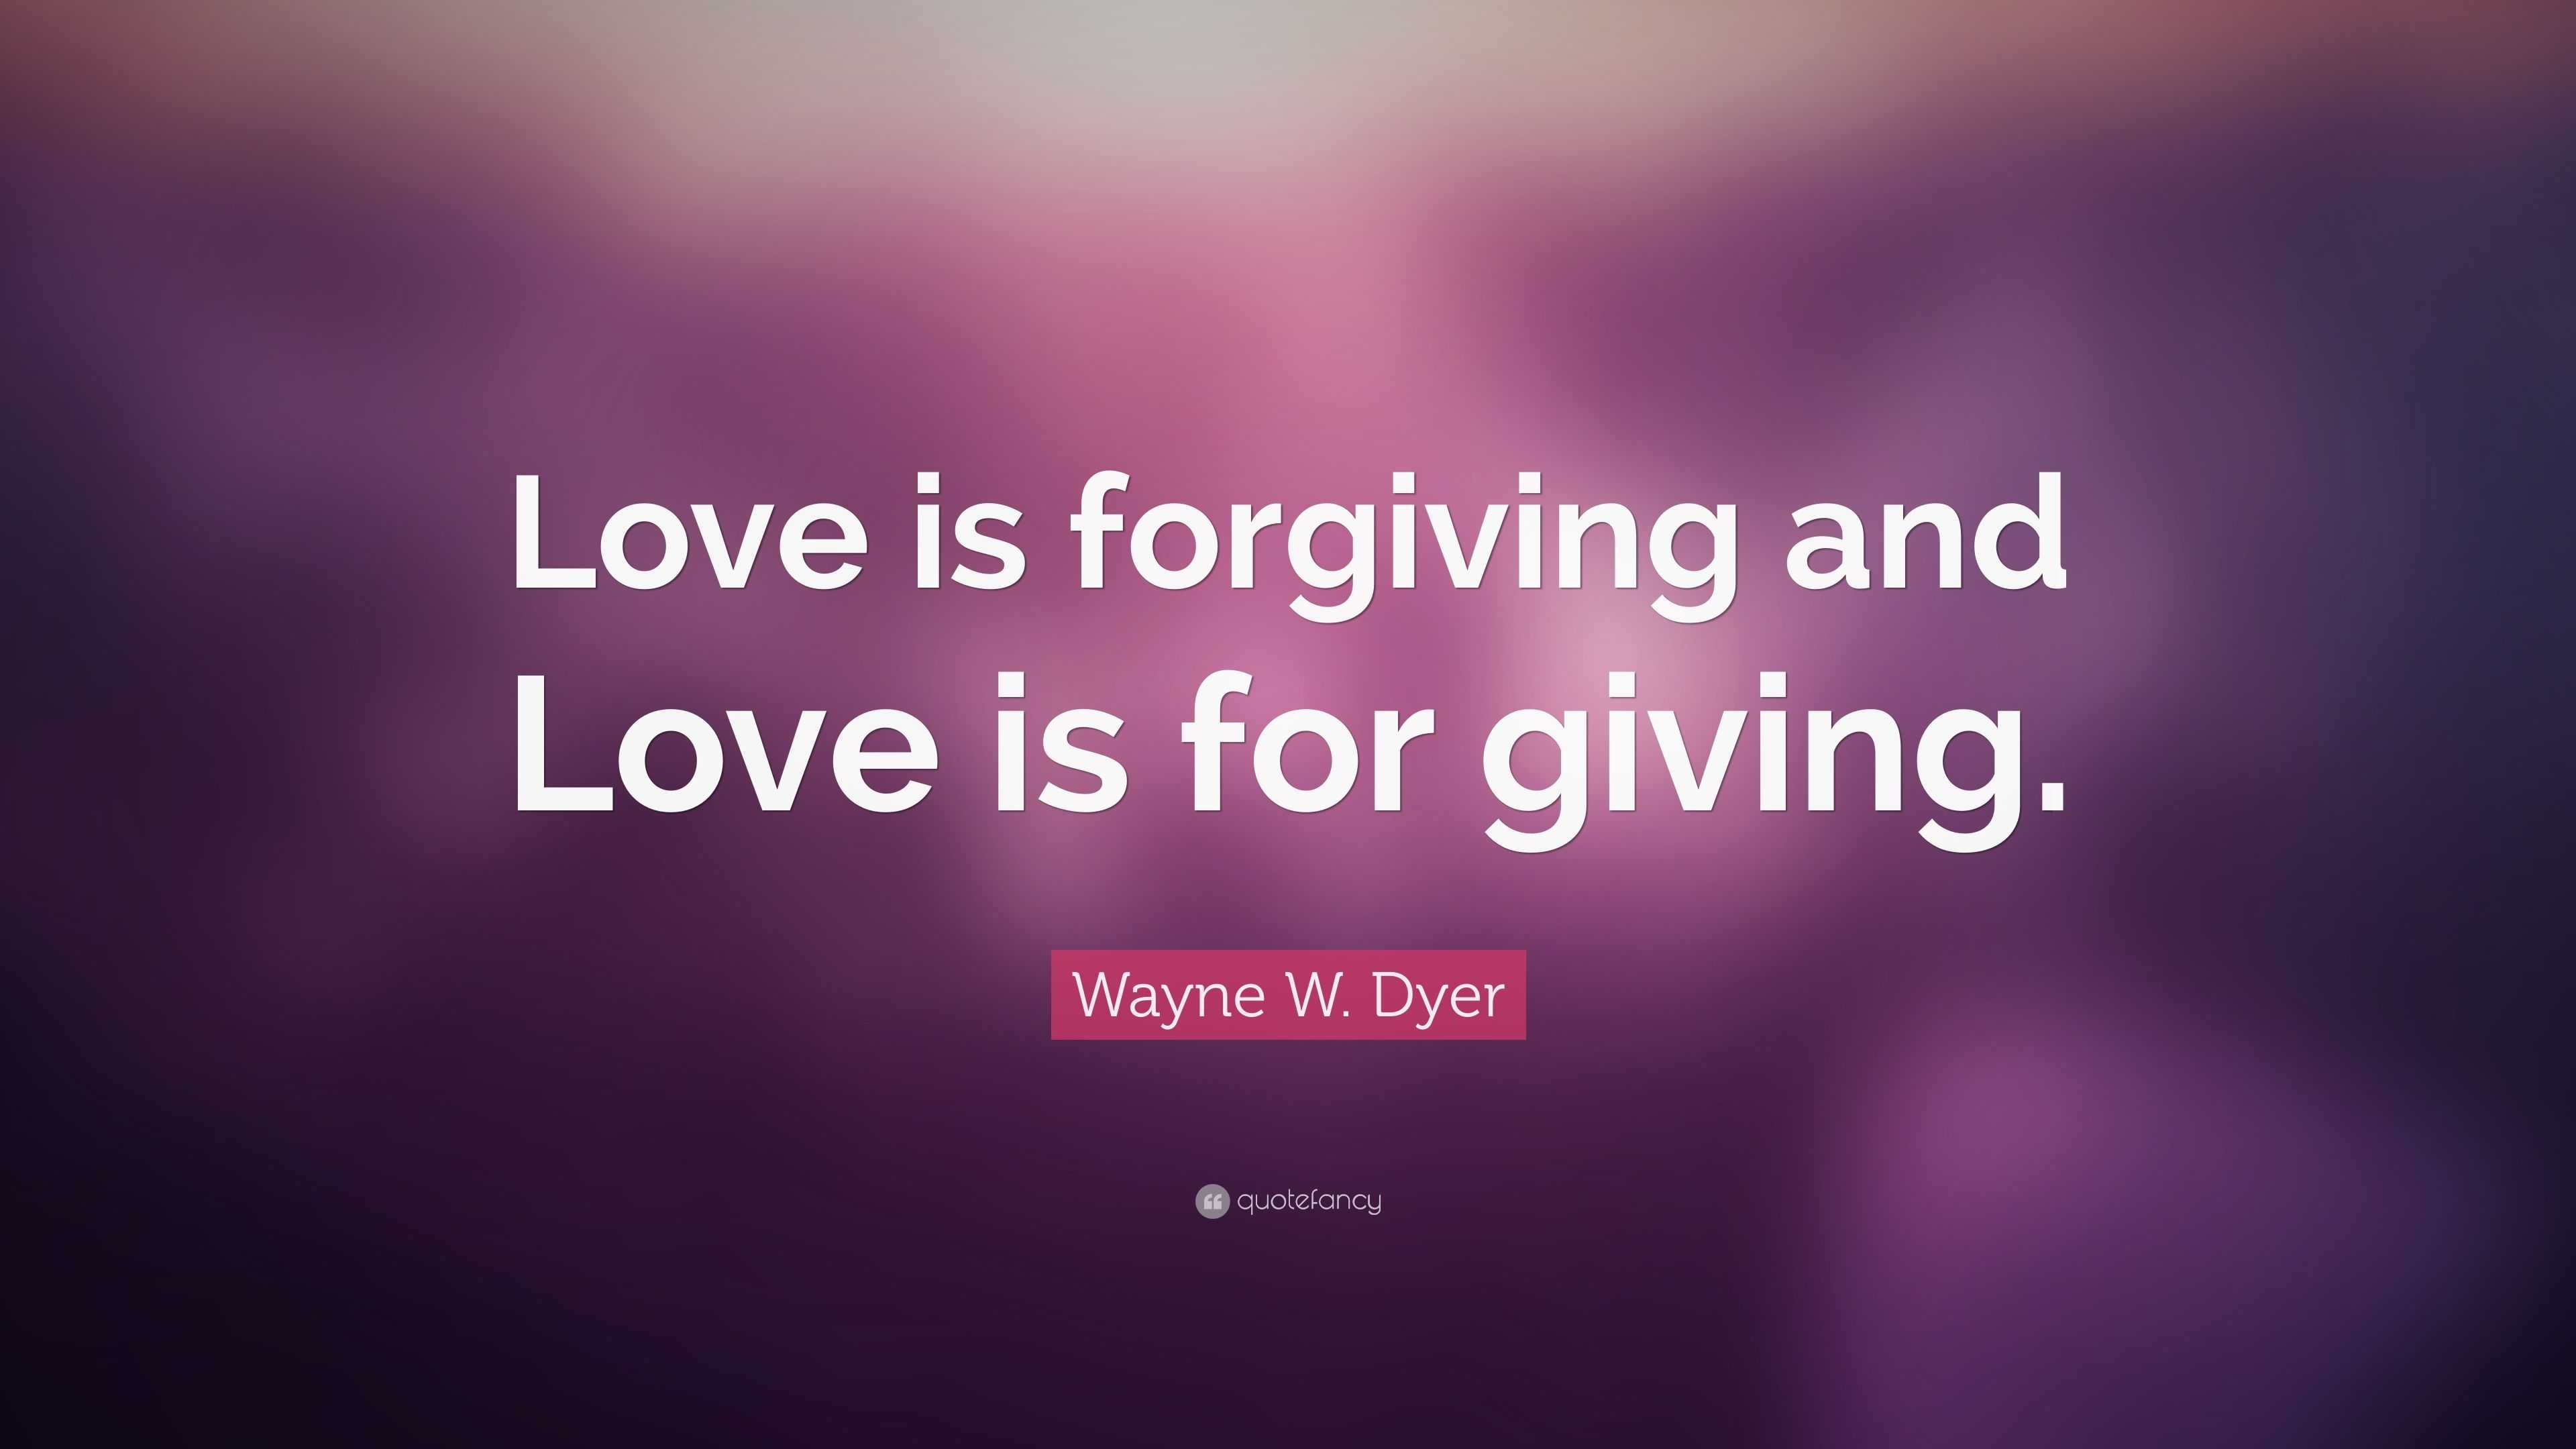 essay on the topic love is giving and forgiving